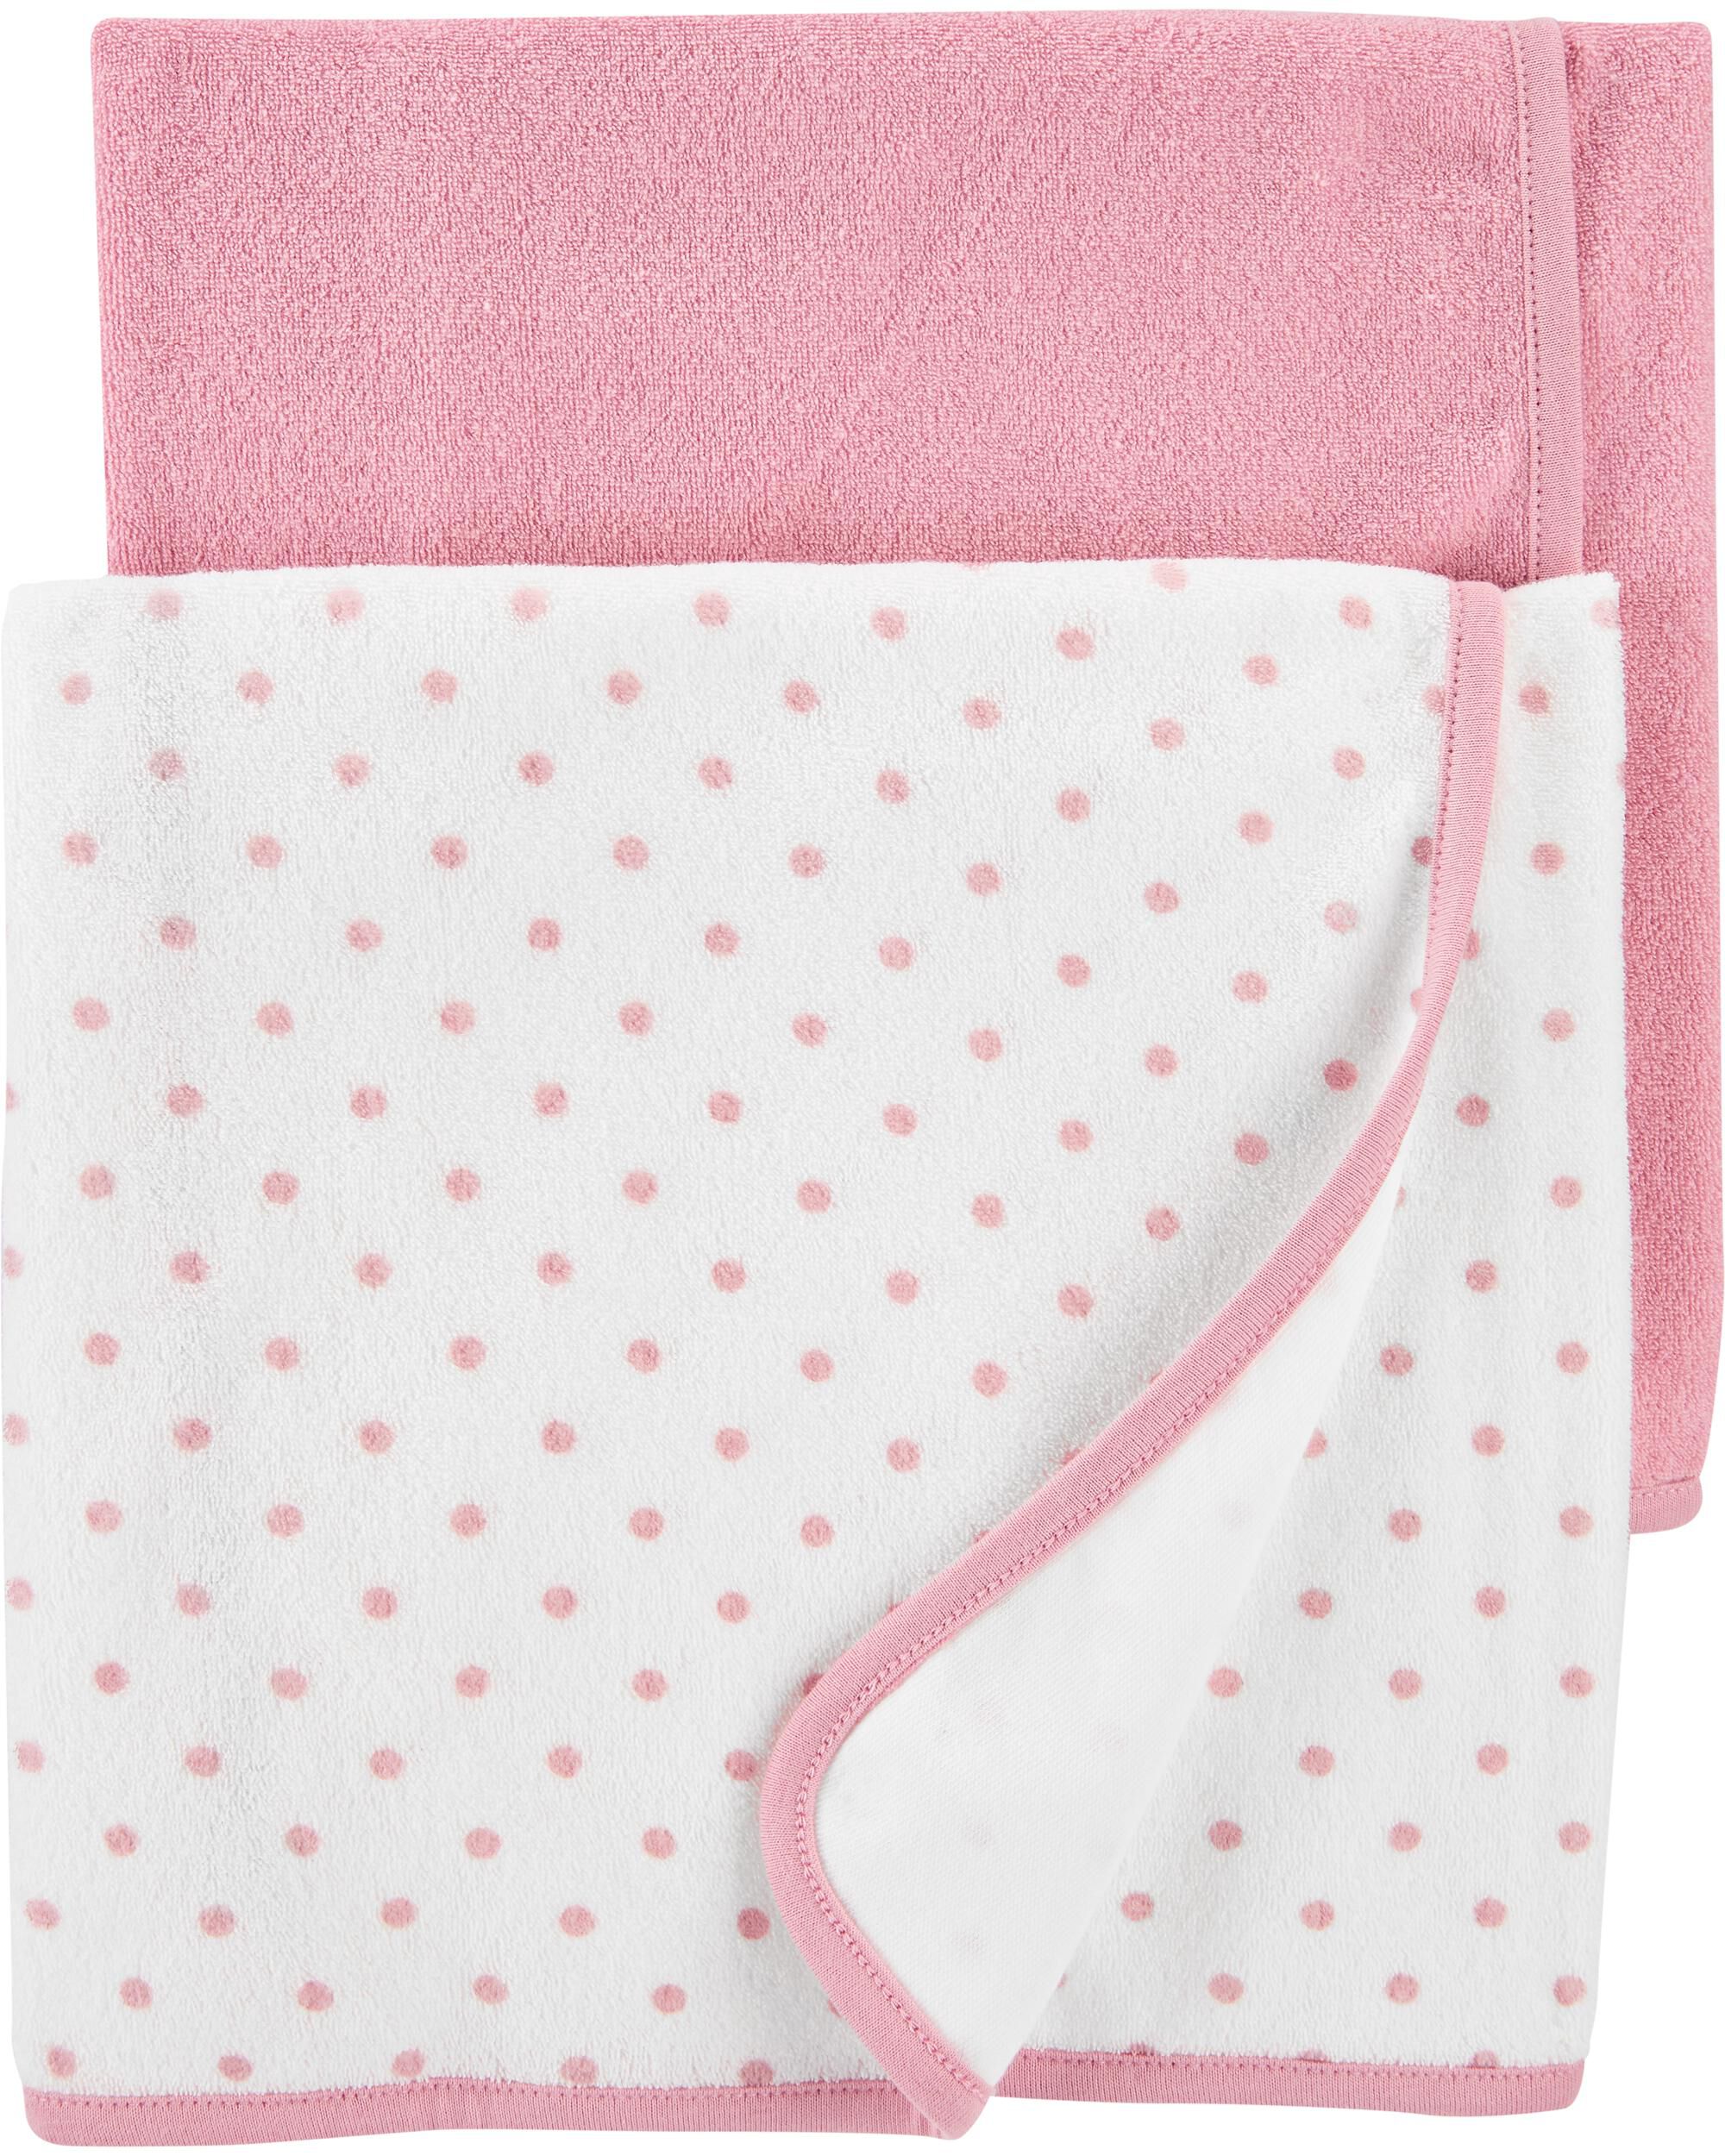 Carters Baby 2-Pack Baby Towels